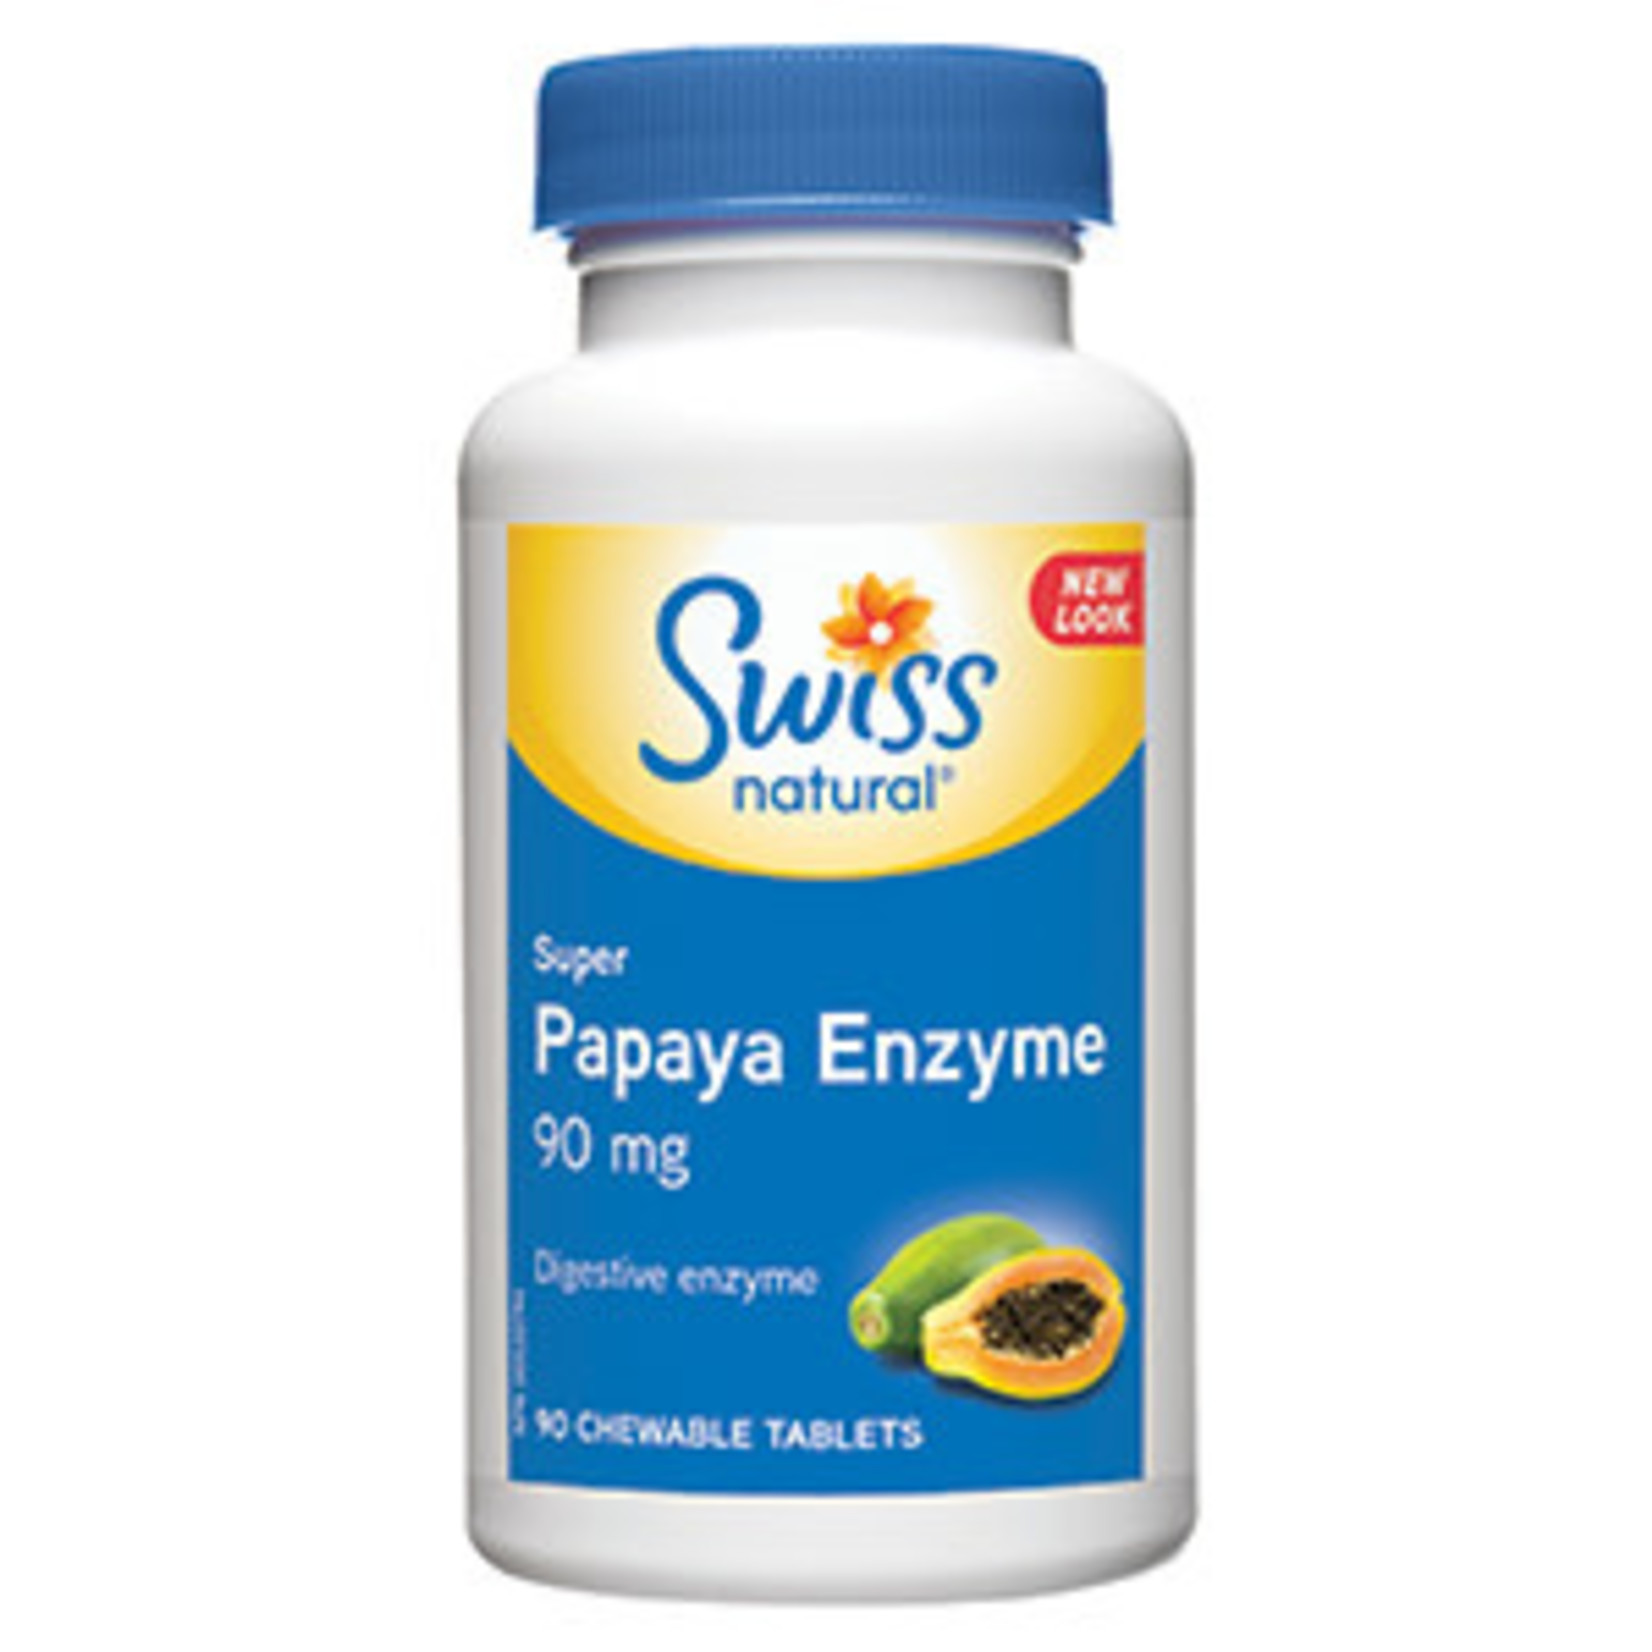 SWISS NATURAL SWISS NATURAL SUPER PAPAYA ENZYME 200 CHEWABLE TABS